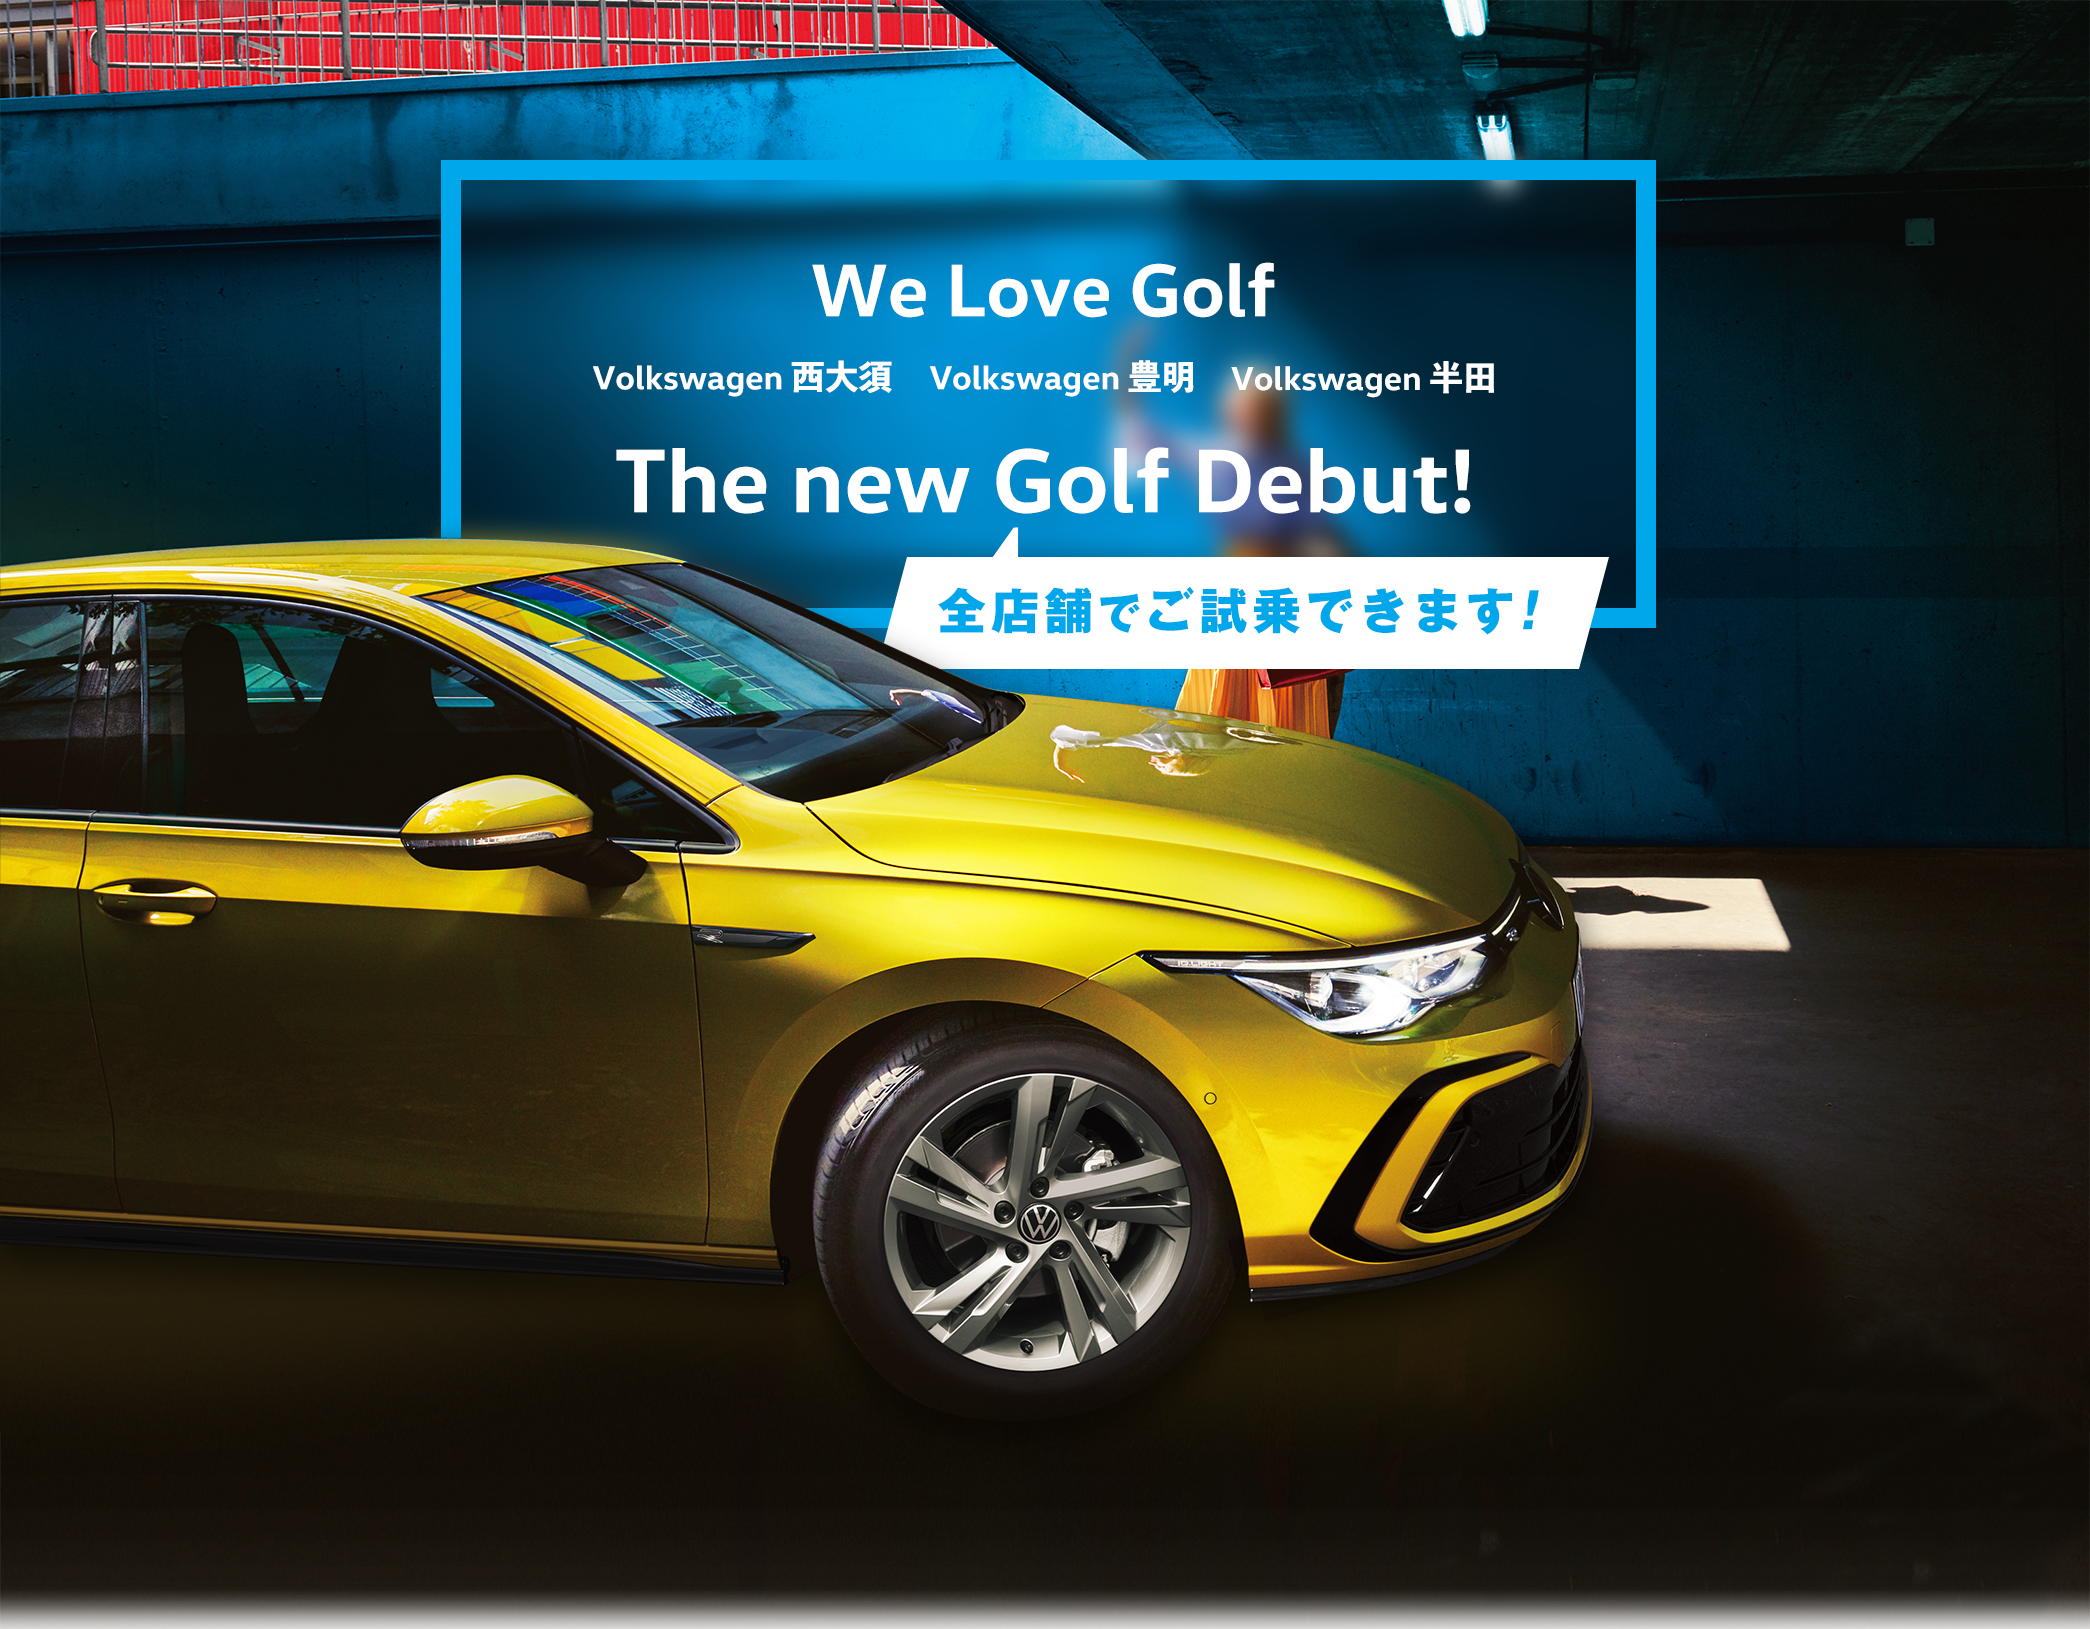 The new Golf Debut!